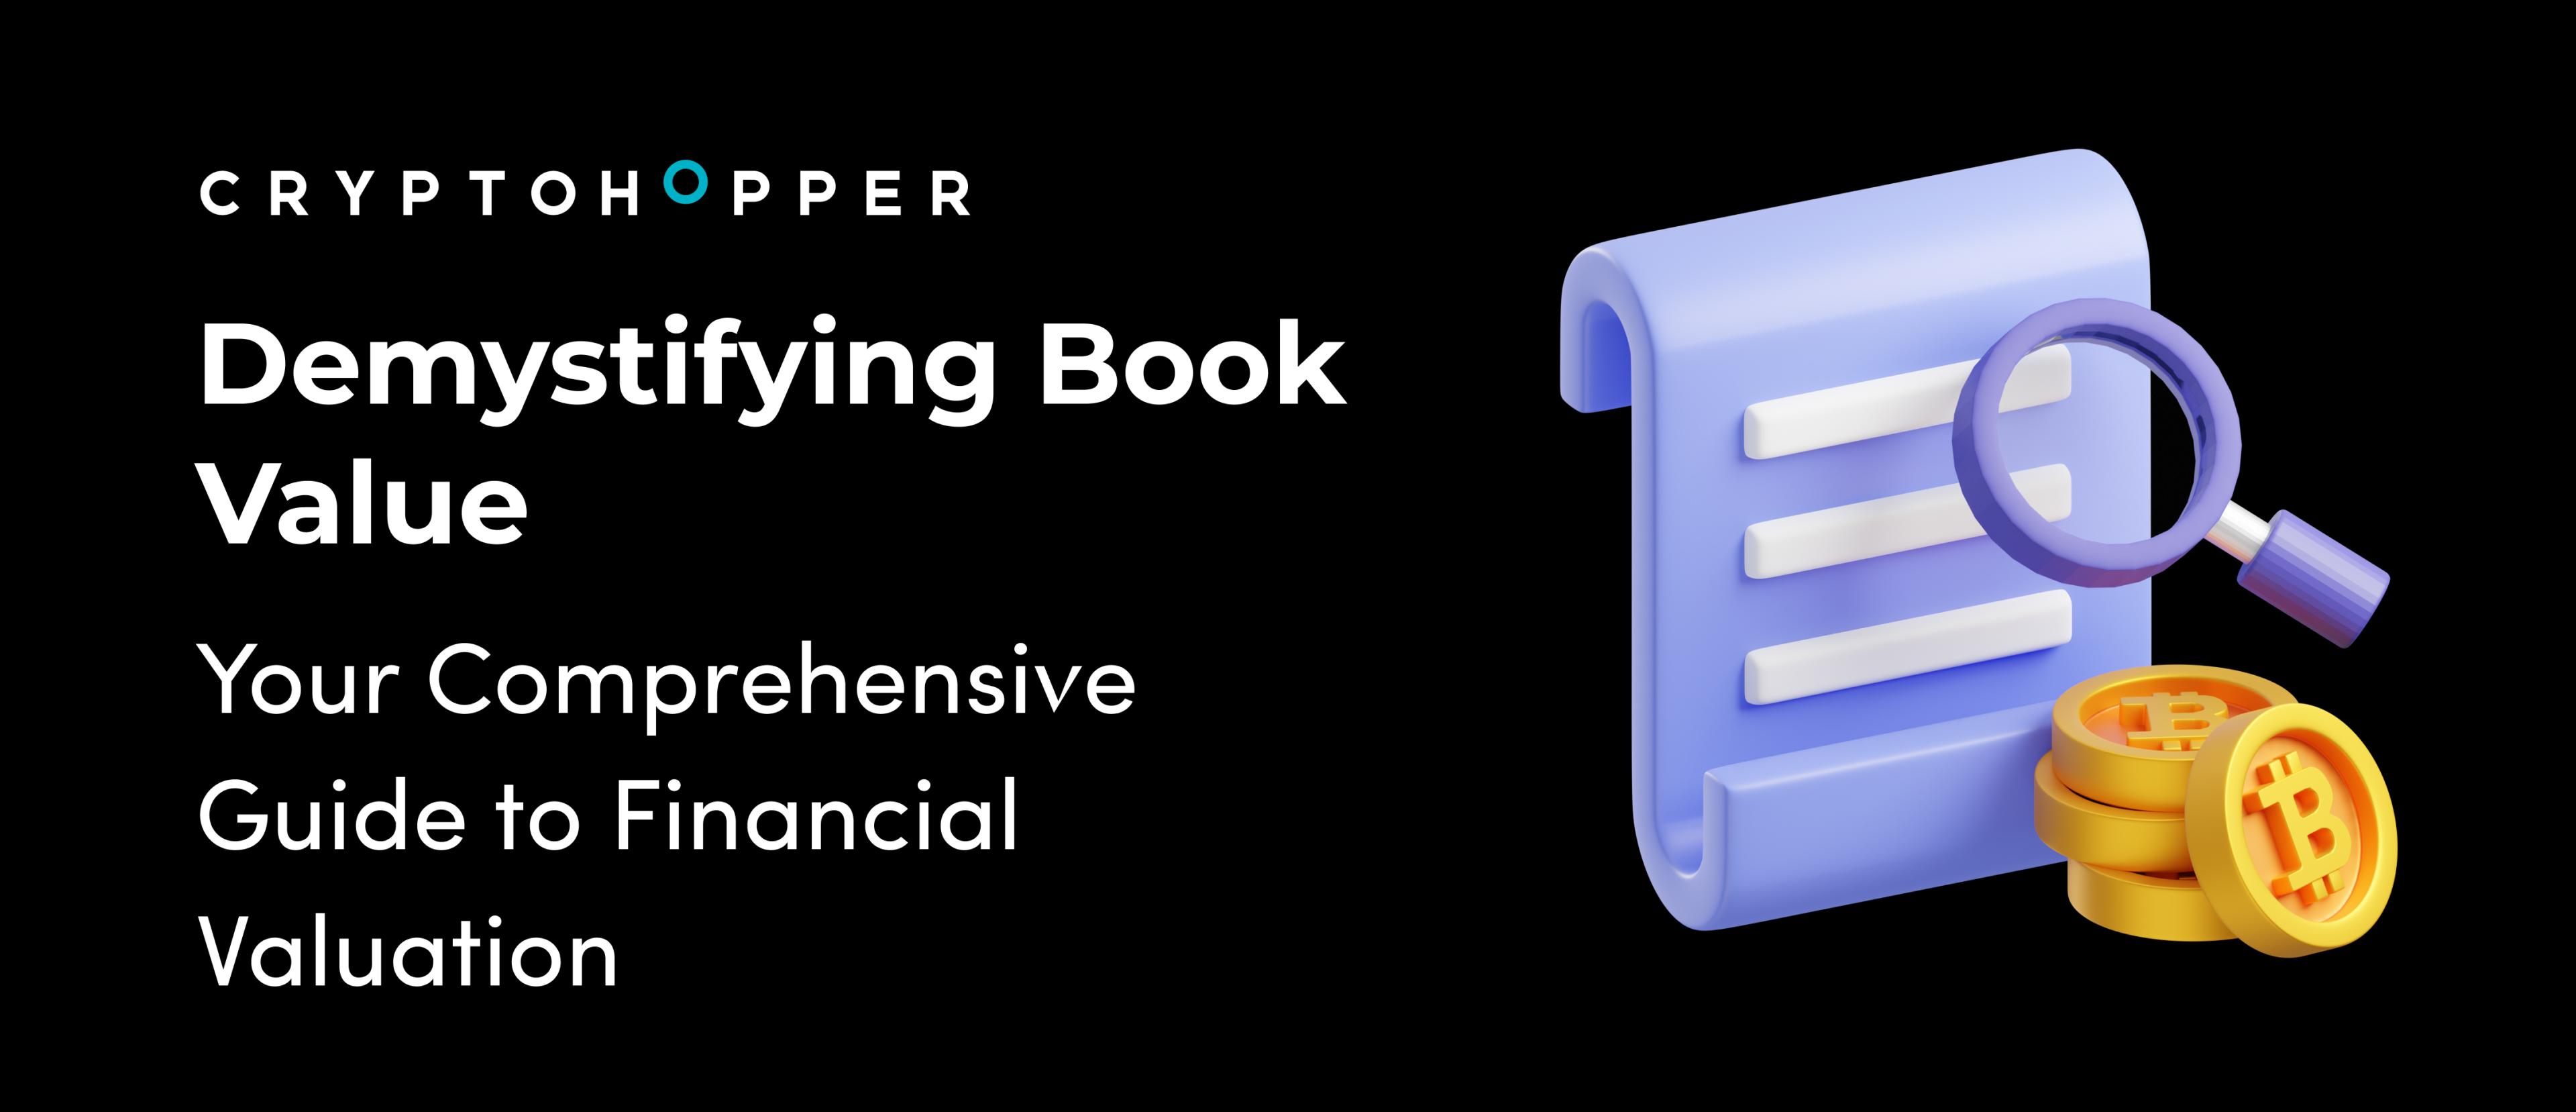 Demystifying Book Value Your Comprehensive Guide to Financial Valuation